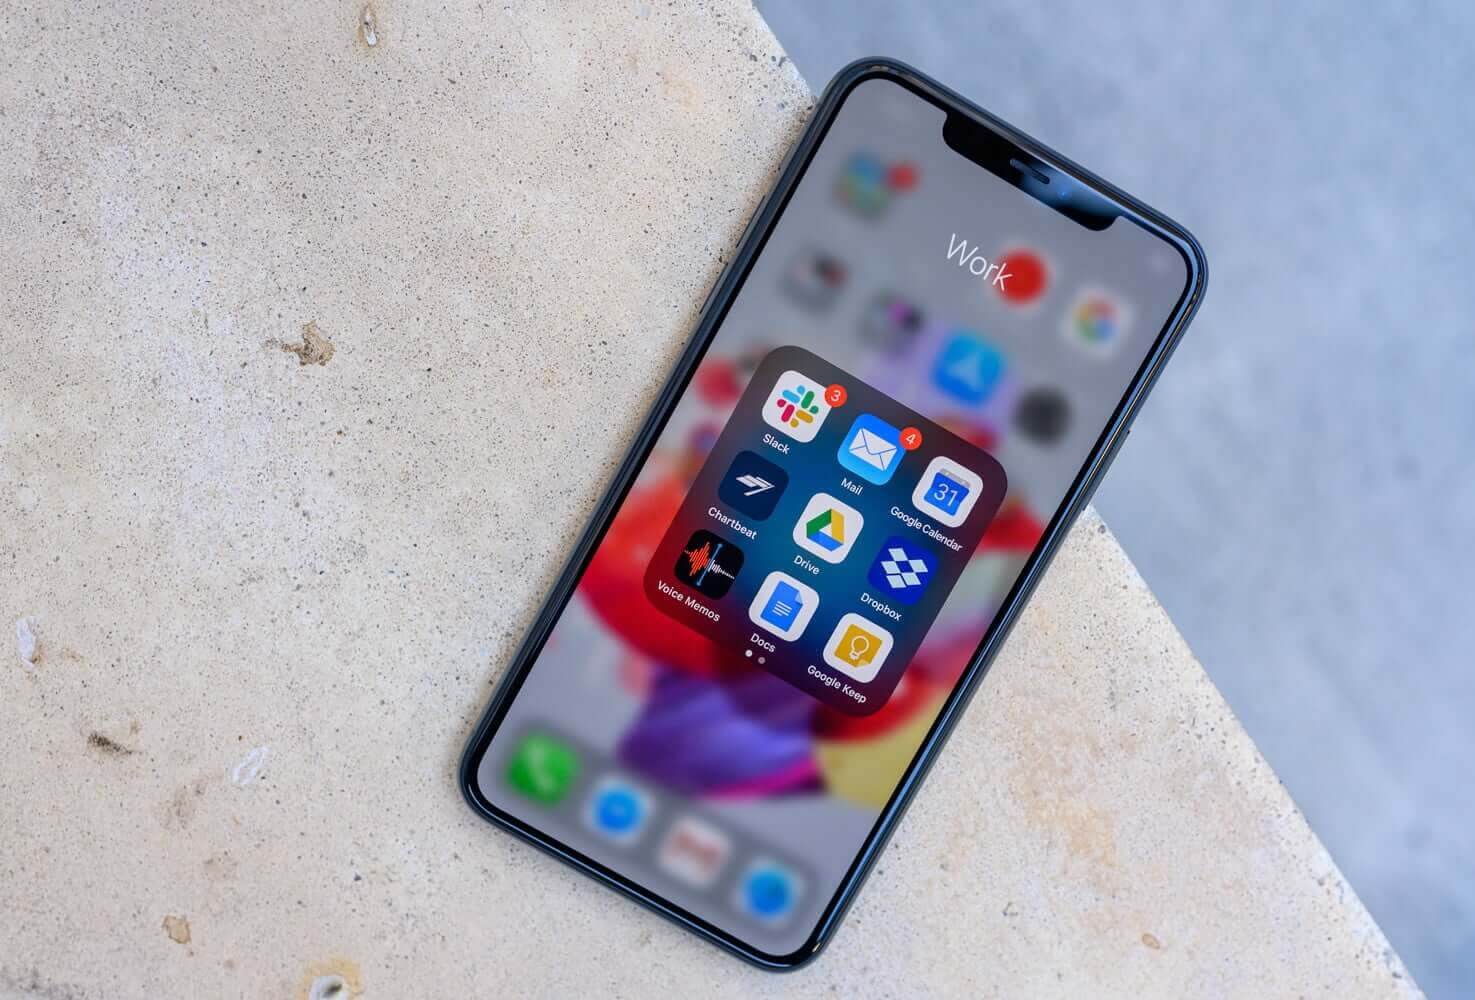 iOS 13.2.3 brings even more background app fixes